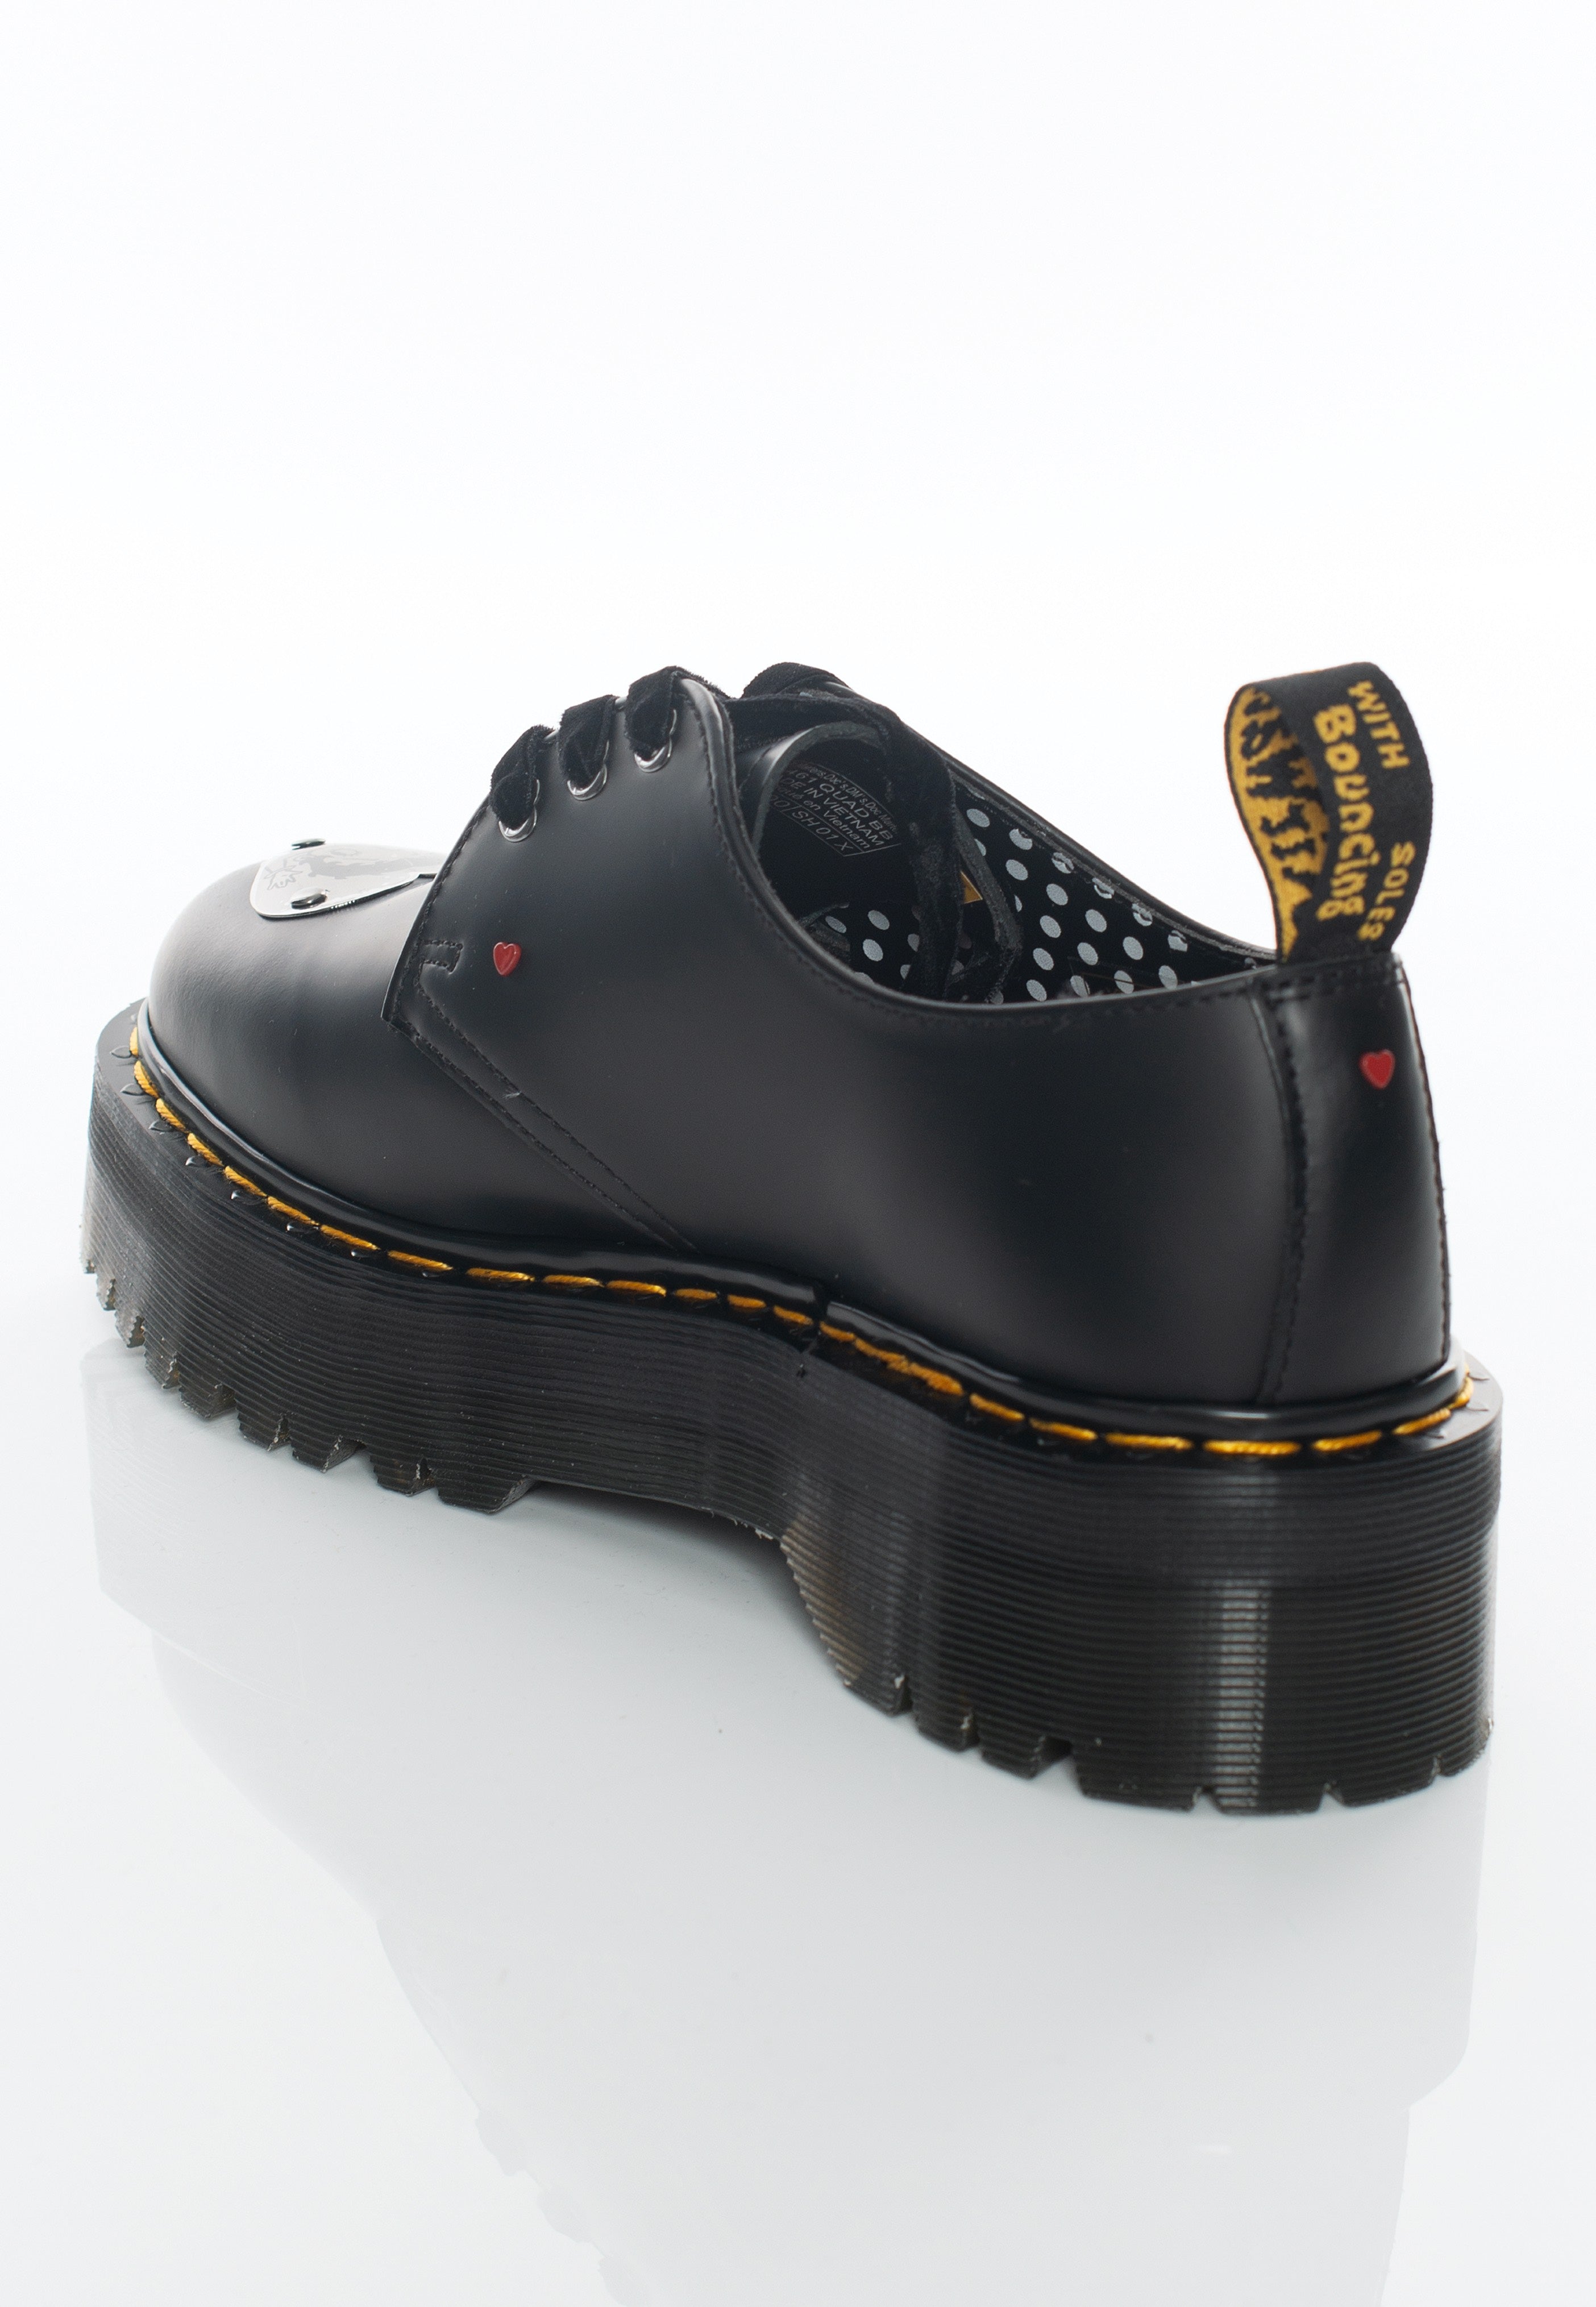 Dr. Martens x Betty Boop - 1461 Quad Black Smooth - Girl Shoes